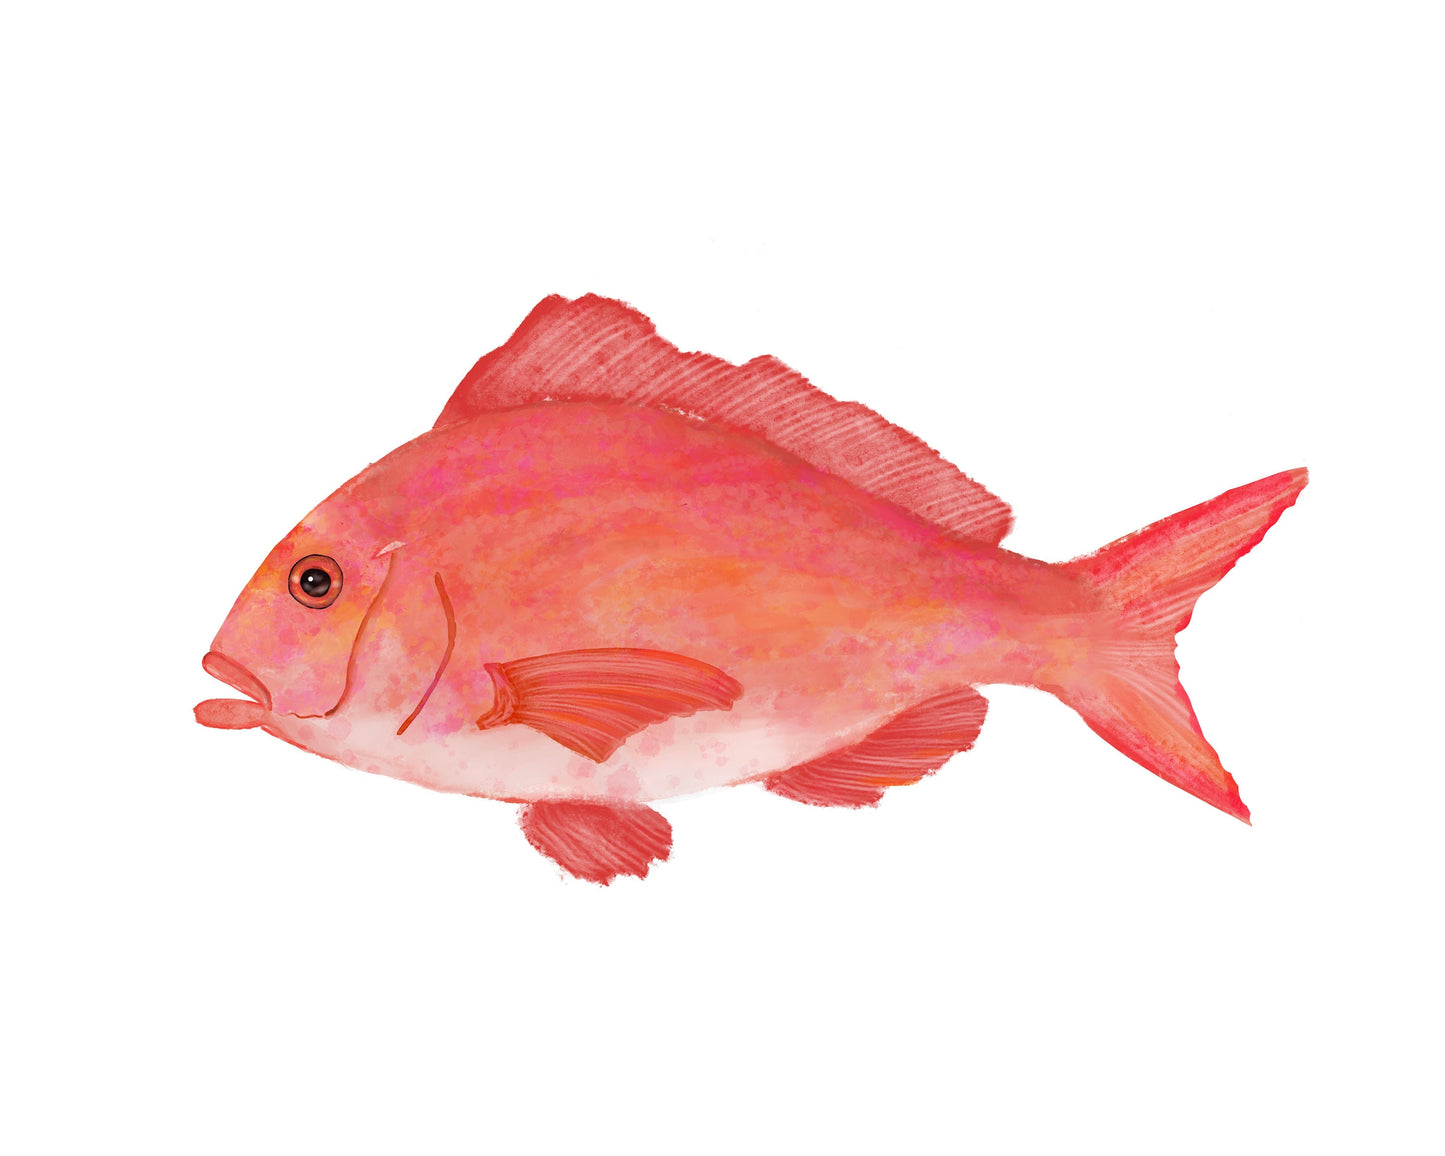 Red Snapper Fish Print